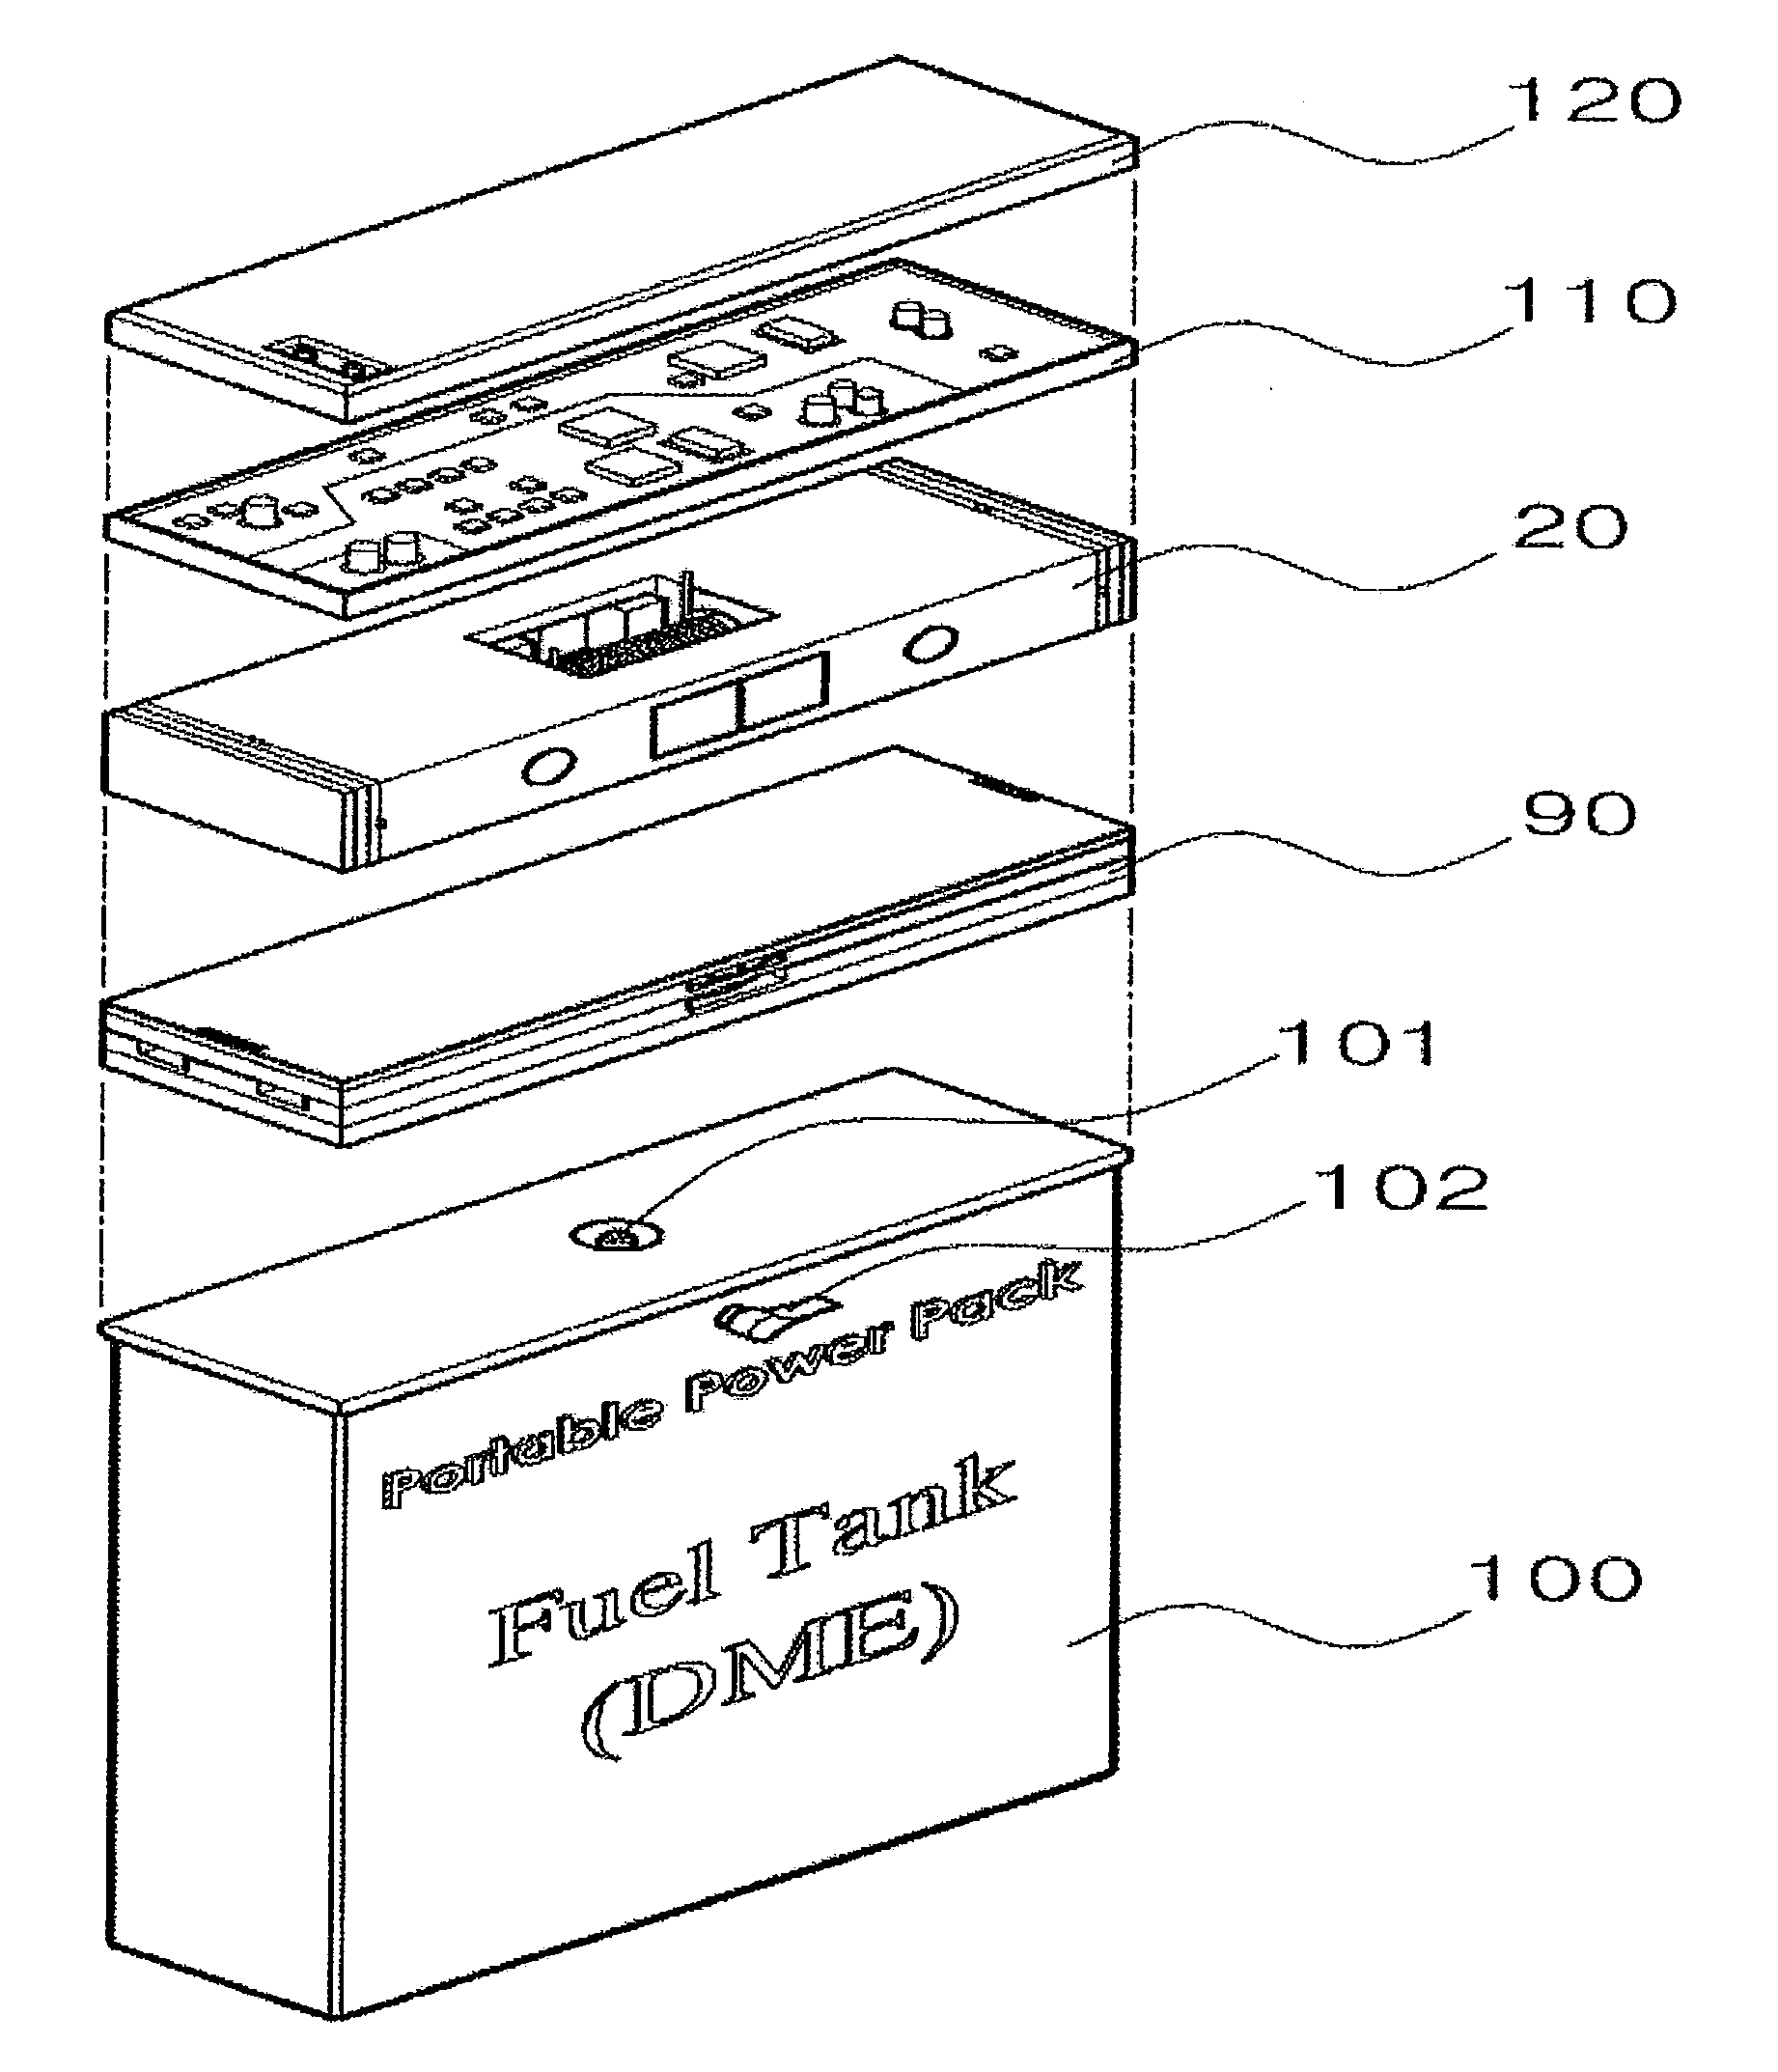 Portable power pack, fuel/air supply for the portable power pack, uniflow scavenging micro-engine for the portable power pack and operation method thereof